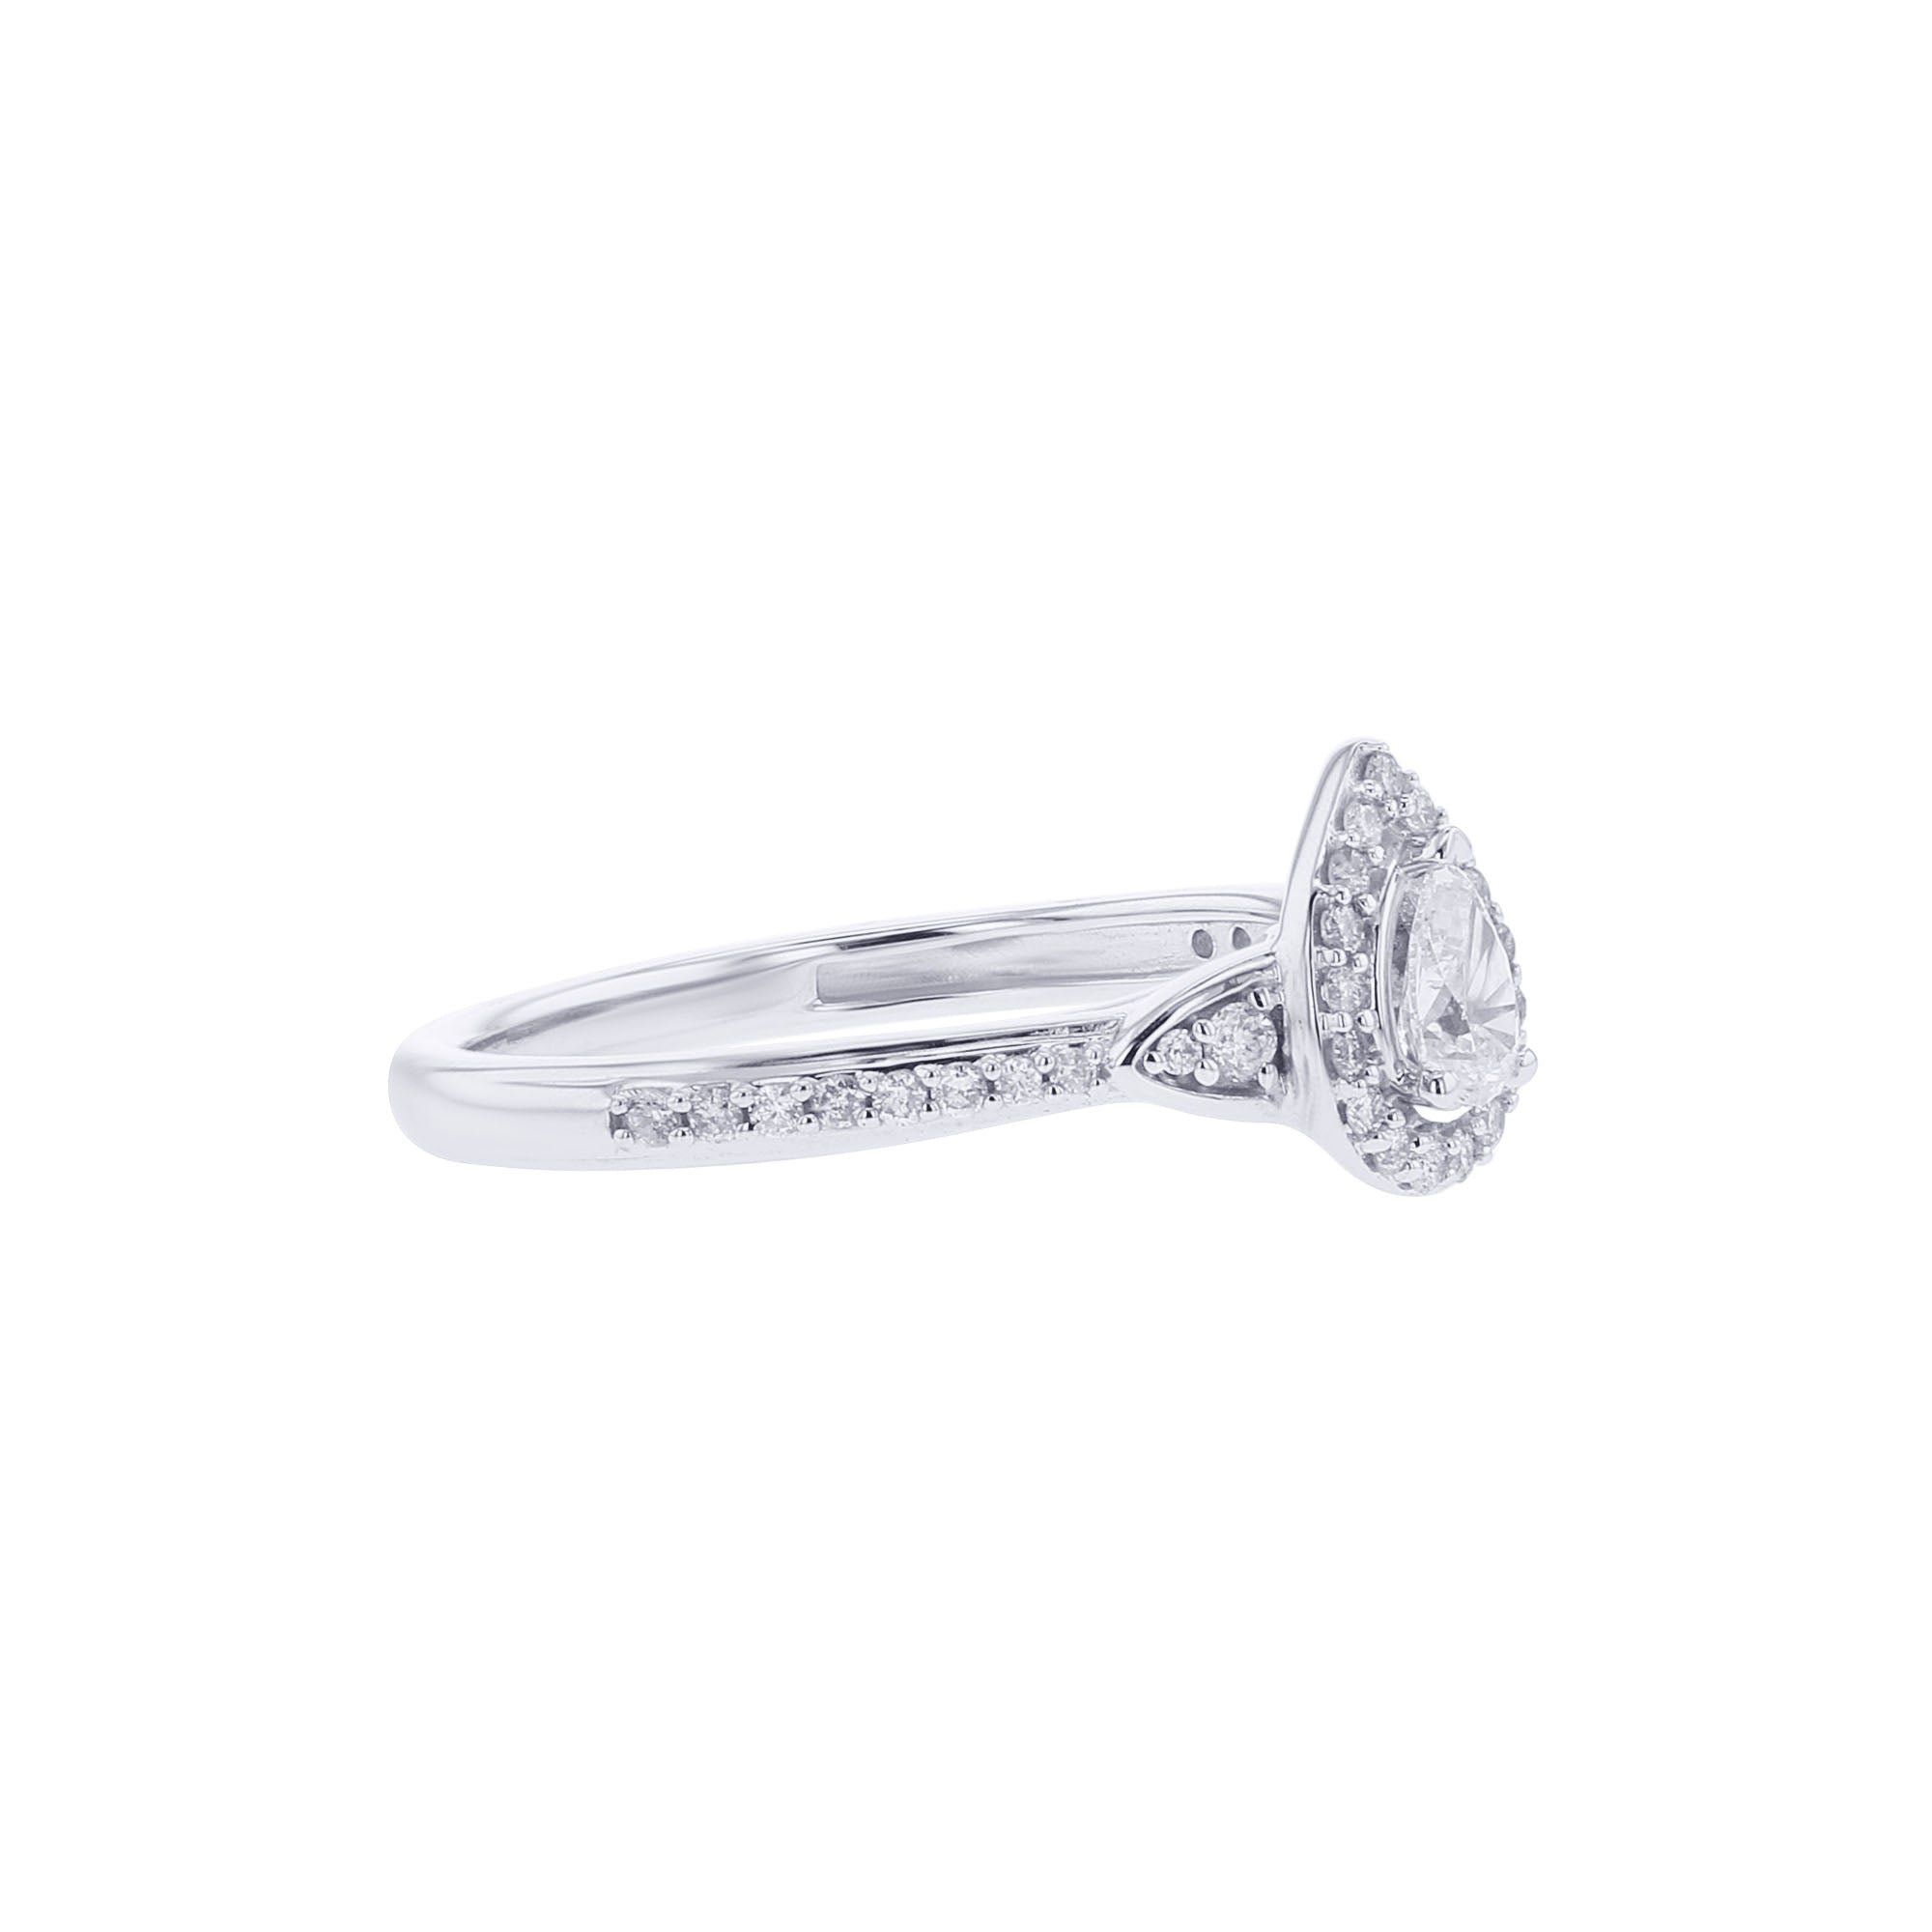 Paola Pear Halo Ready for Love Diamond Engagement Ring